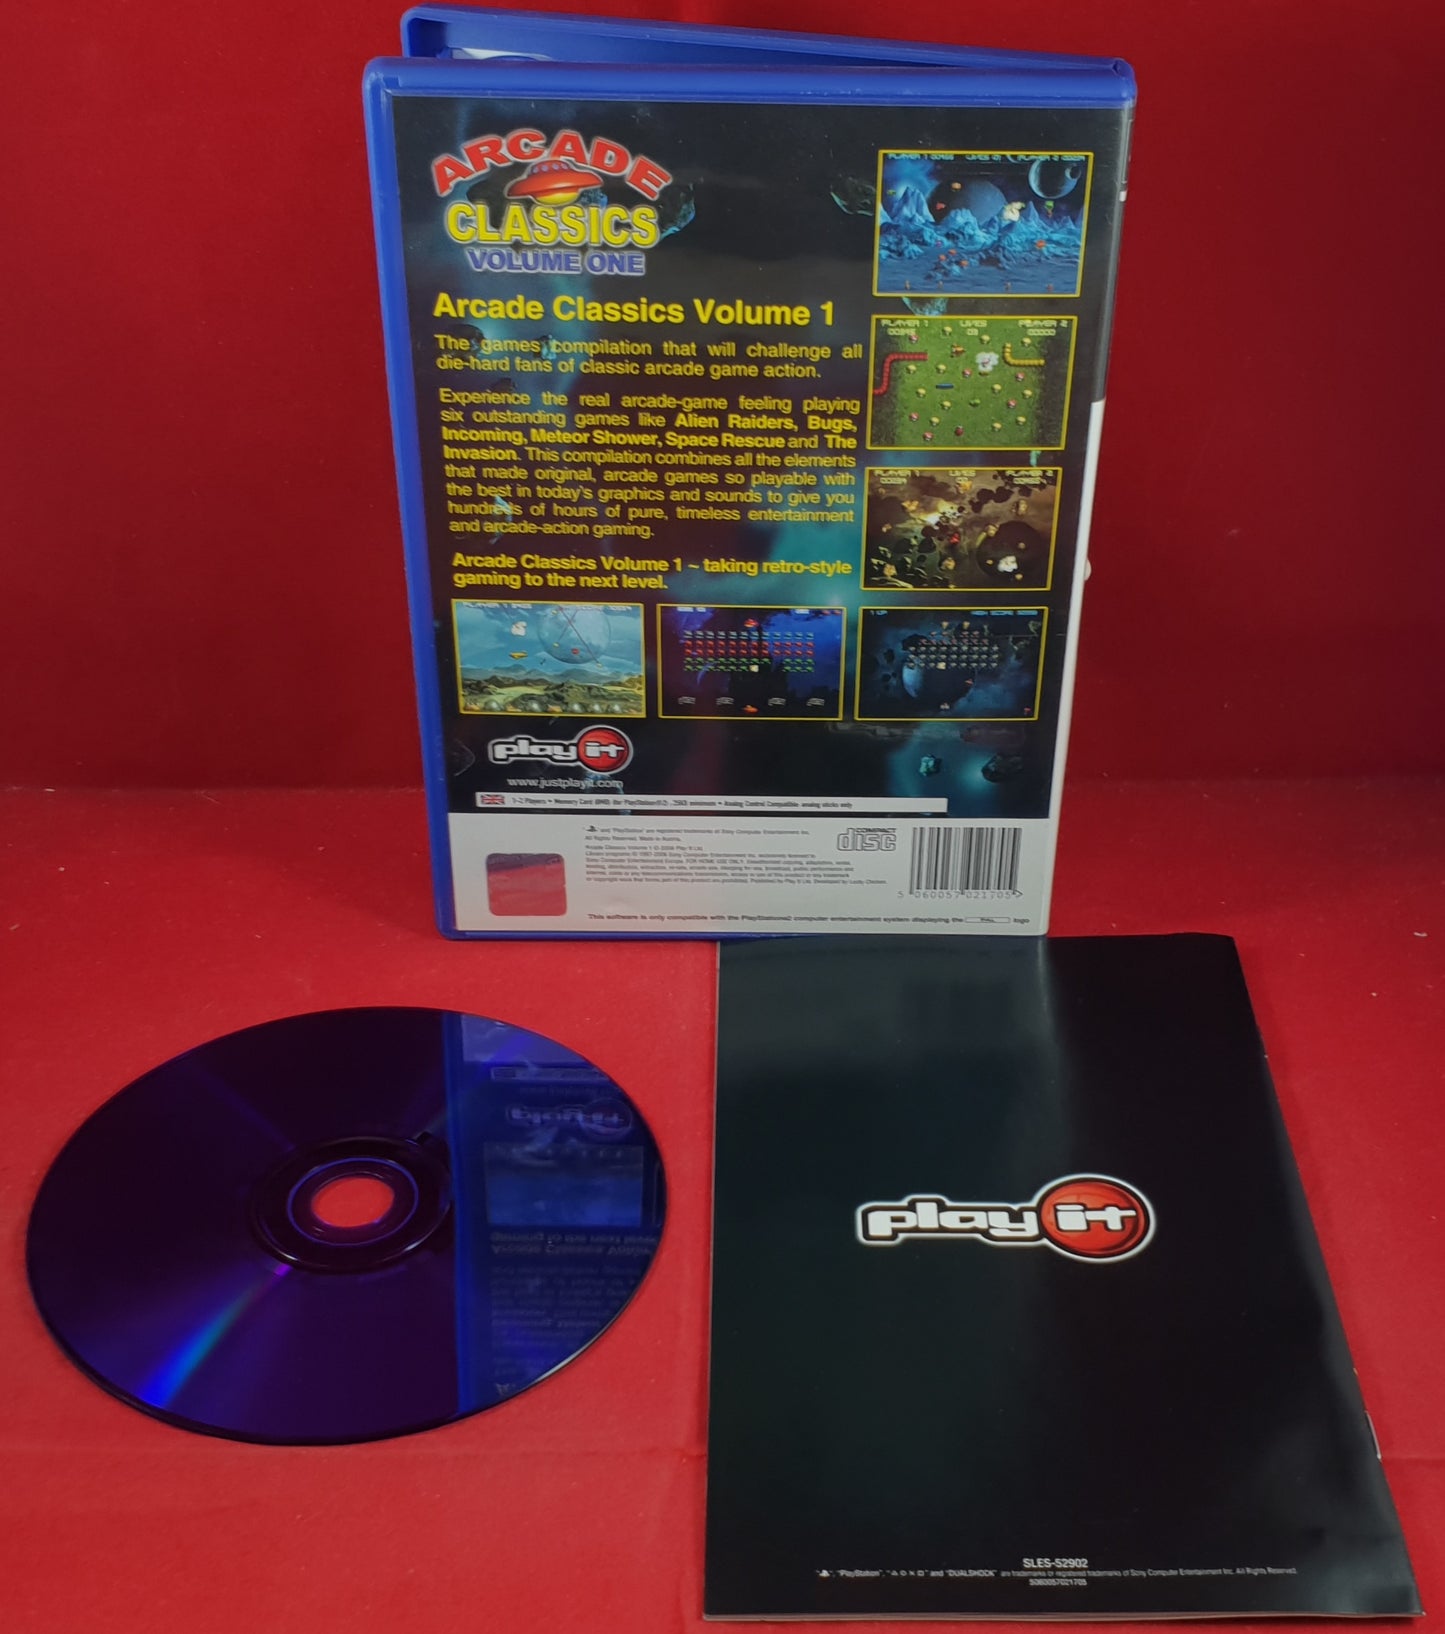 Arcade Classics Volume One Sony Playstation 2 (PS2) Game